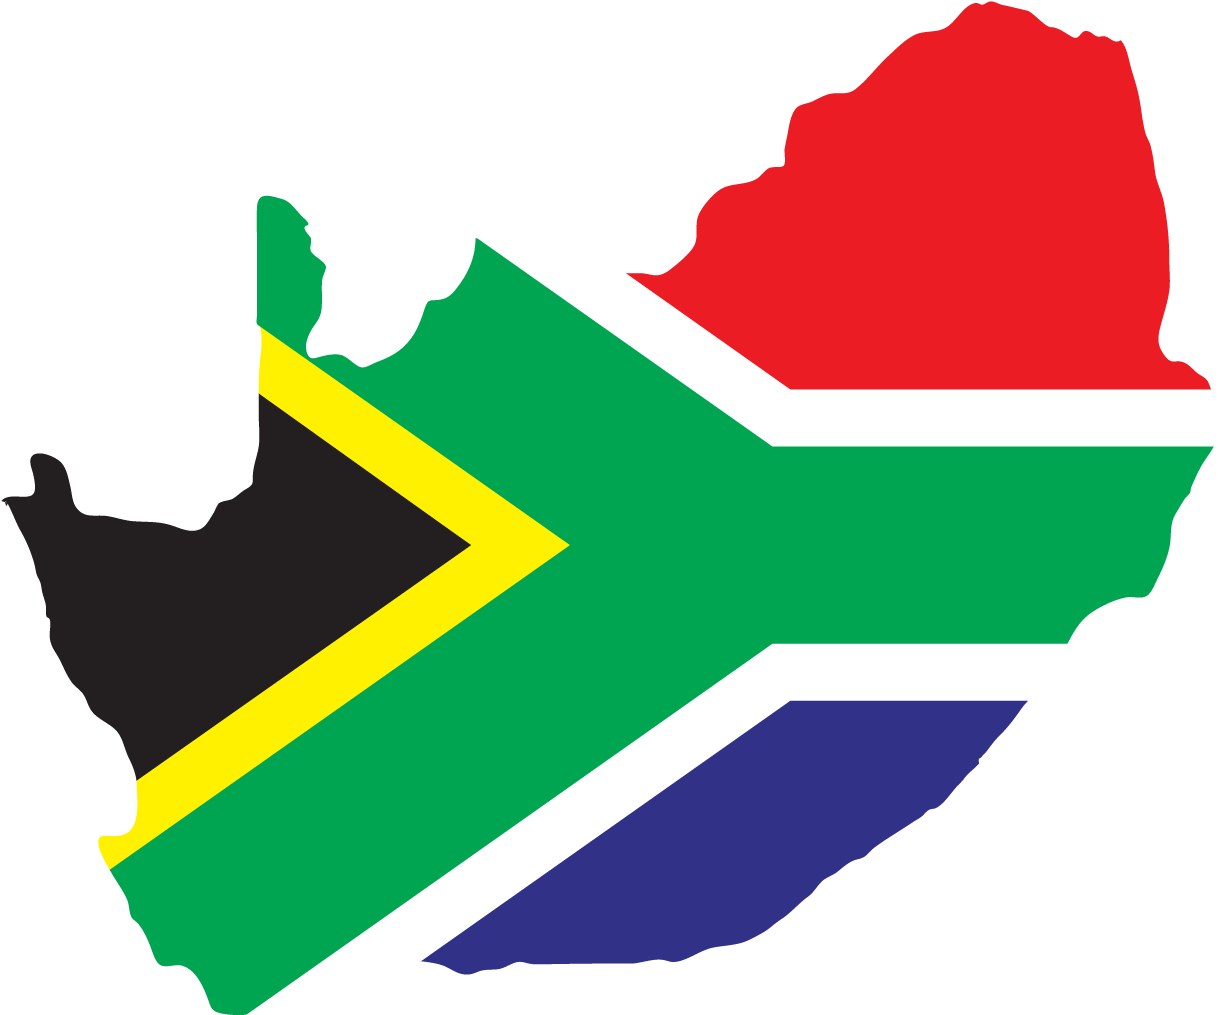 Flag Of South Africa Illustration - South Africa Map Vector (1467x1413)